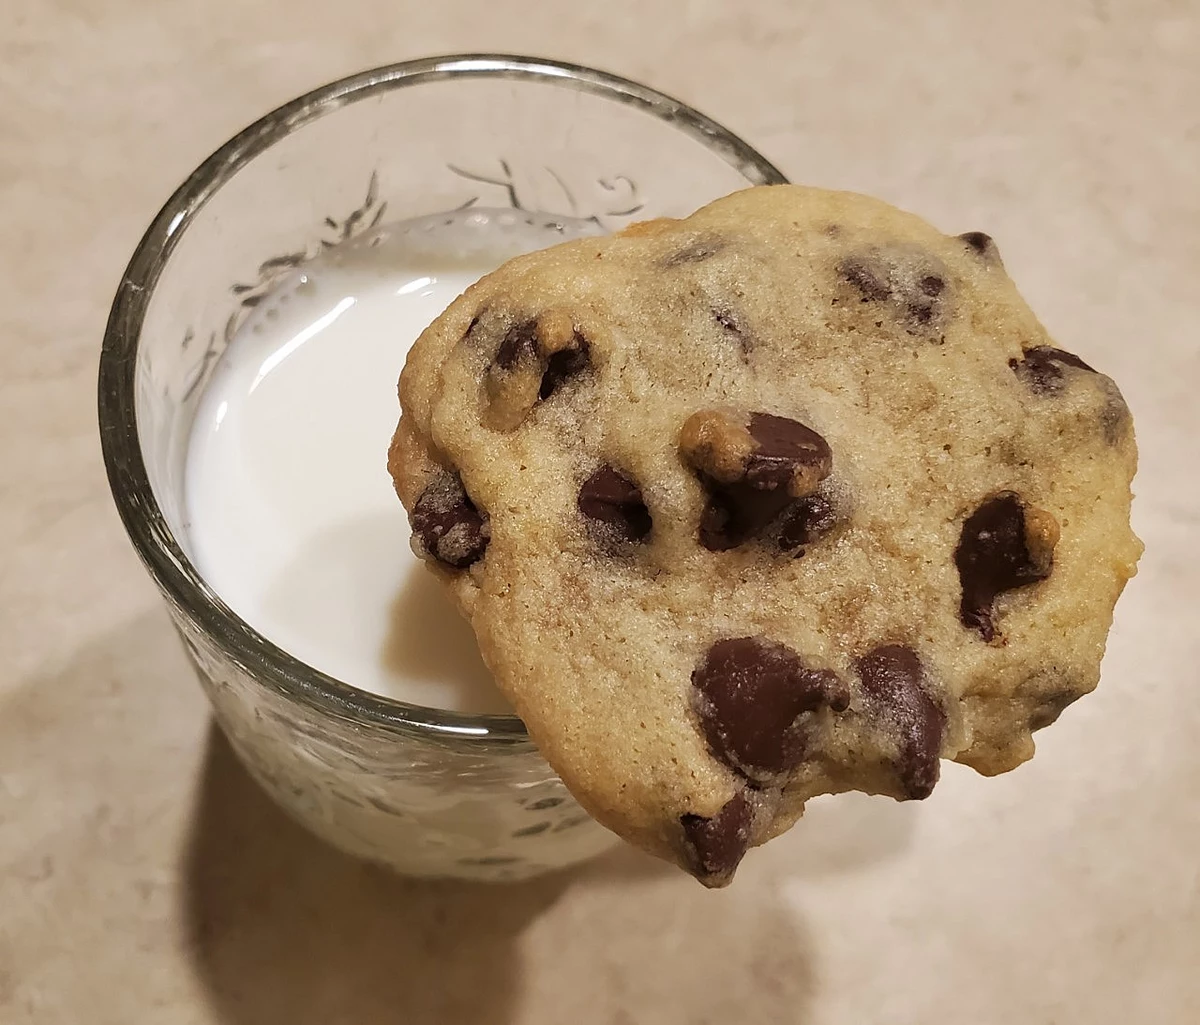 Home - Rebel Cookie Dough and Confections